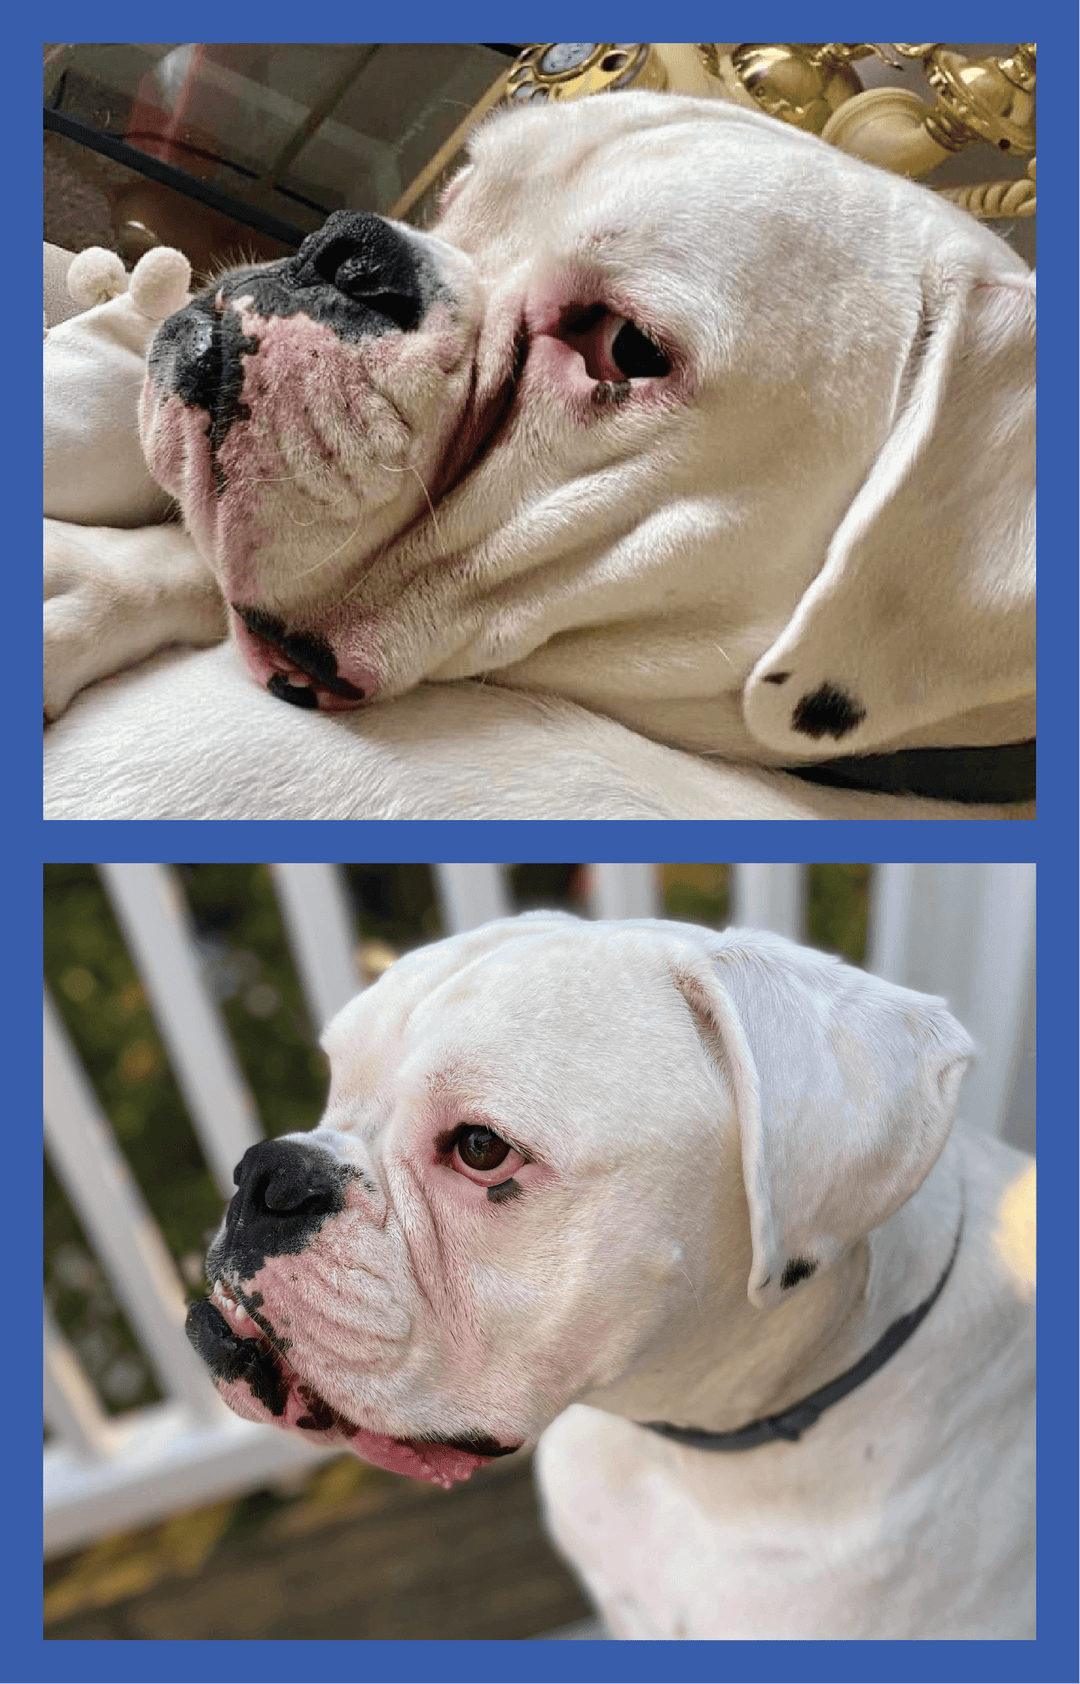 Squishface Wrinkle Paste Boxer Dog Tear Stain TearStains TearStaining Tear Staining Skinfold Skin Fold Pyoderma Dirty Raw Red Irritated Yeast Infected Infection Before After Photo Pic Pics